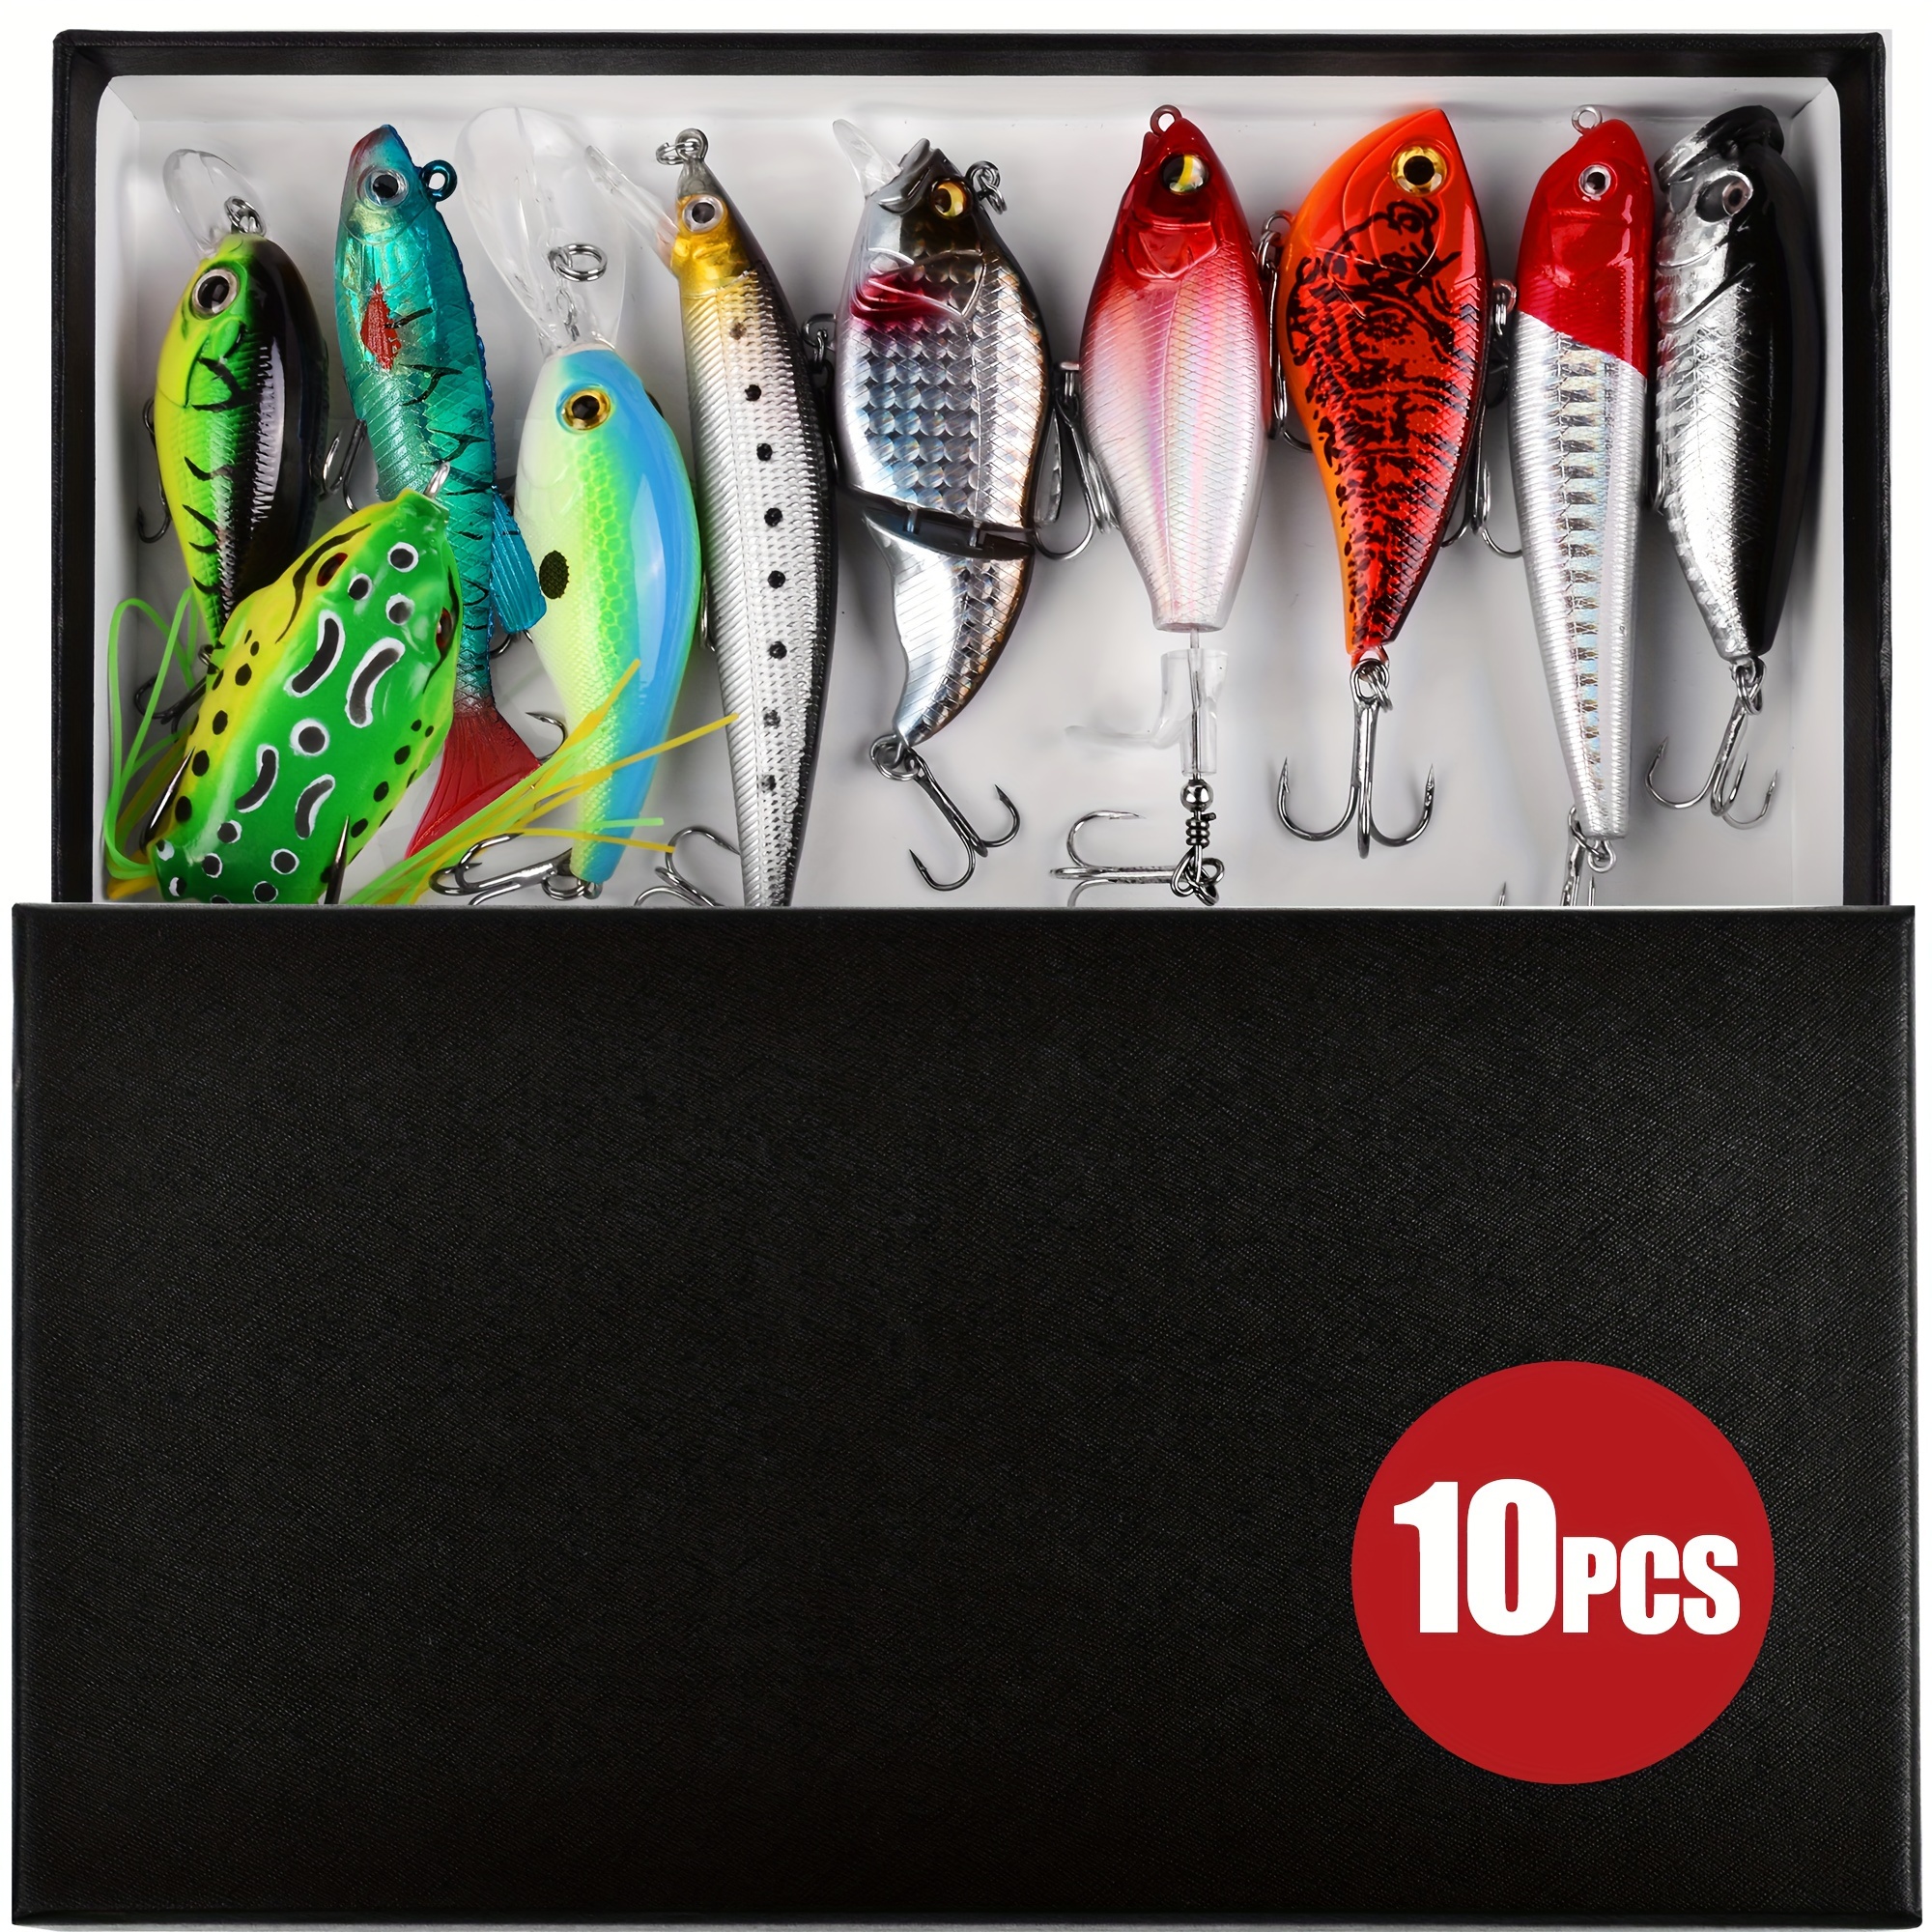 Buy OPQ Fishing Lures Kit Set with Tackle Box Fishing Gear